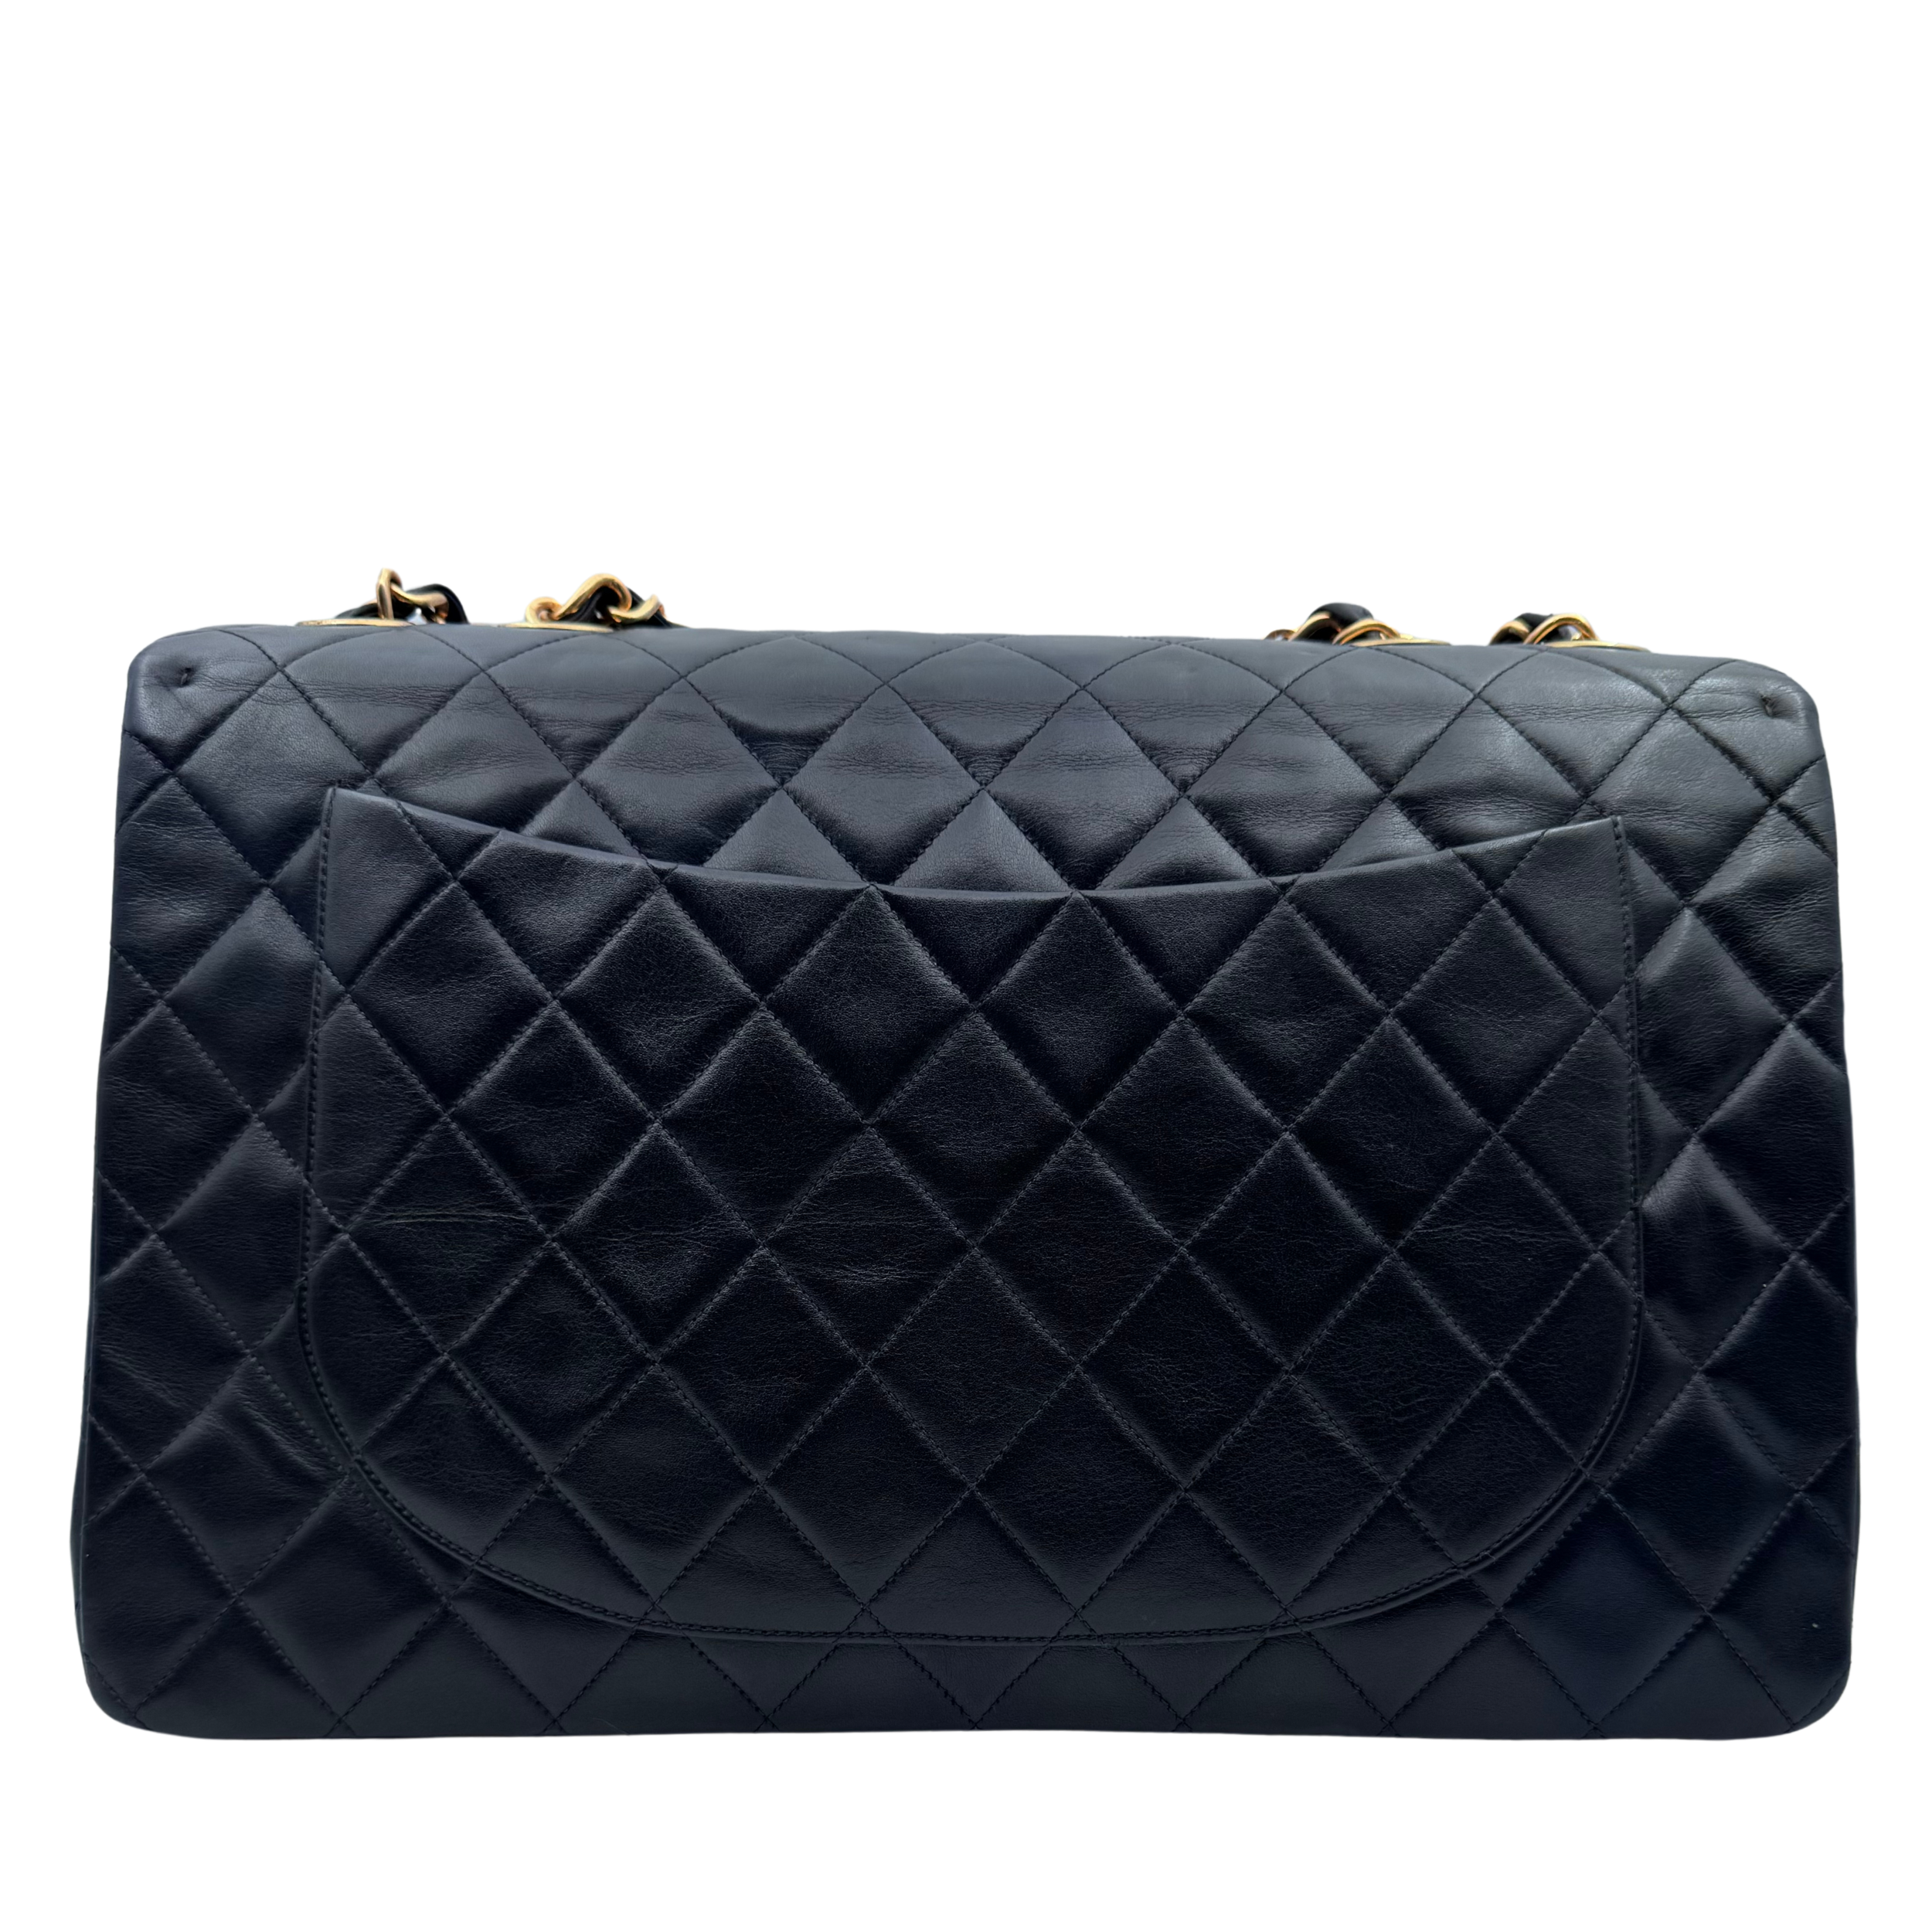 CLASSIC TIMELESS MAXI - CHANEL Lola Collective